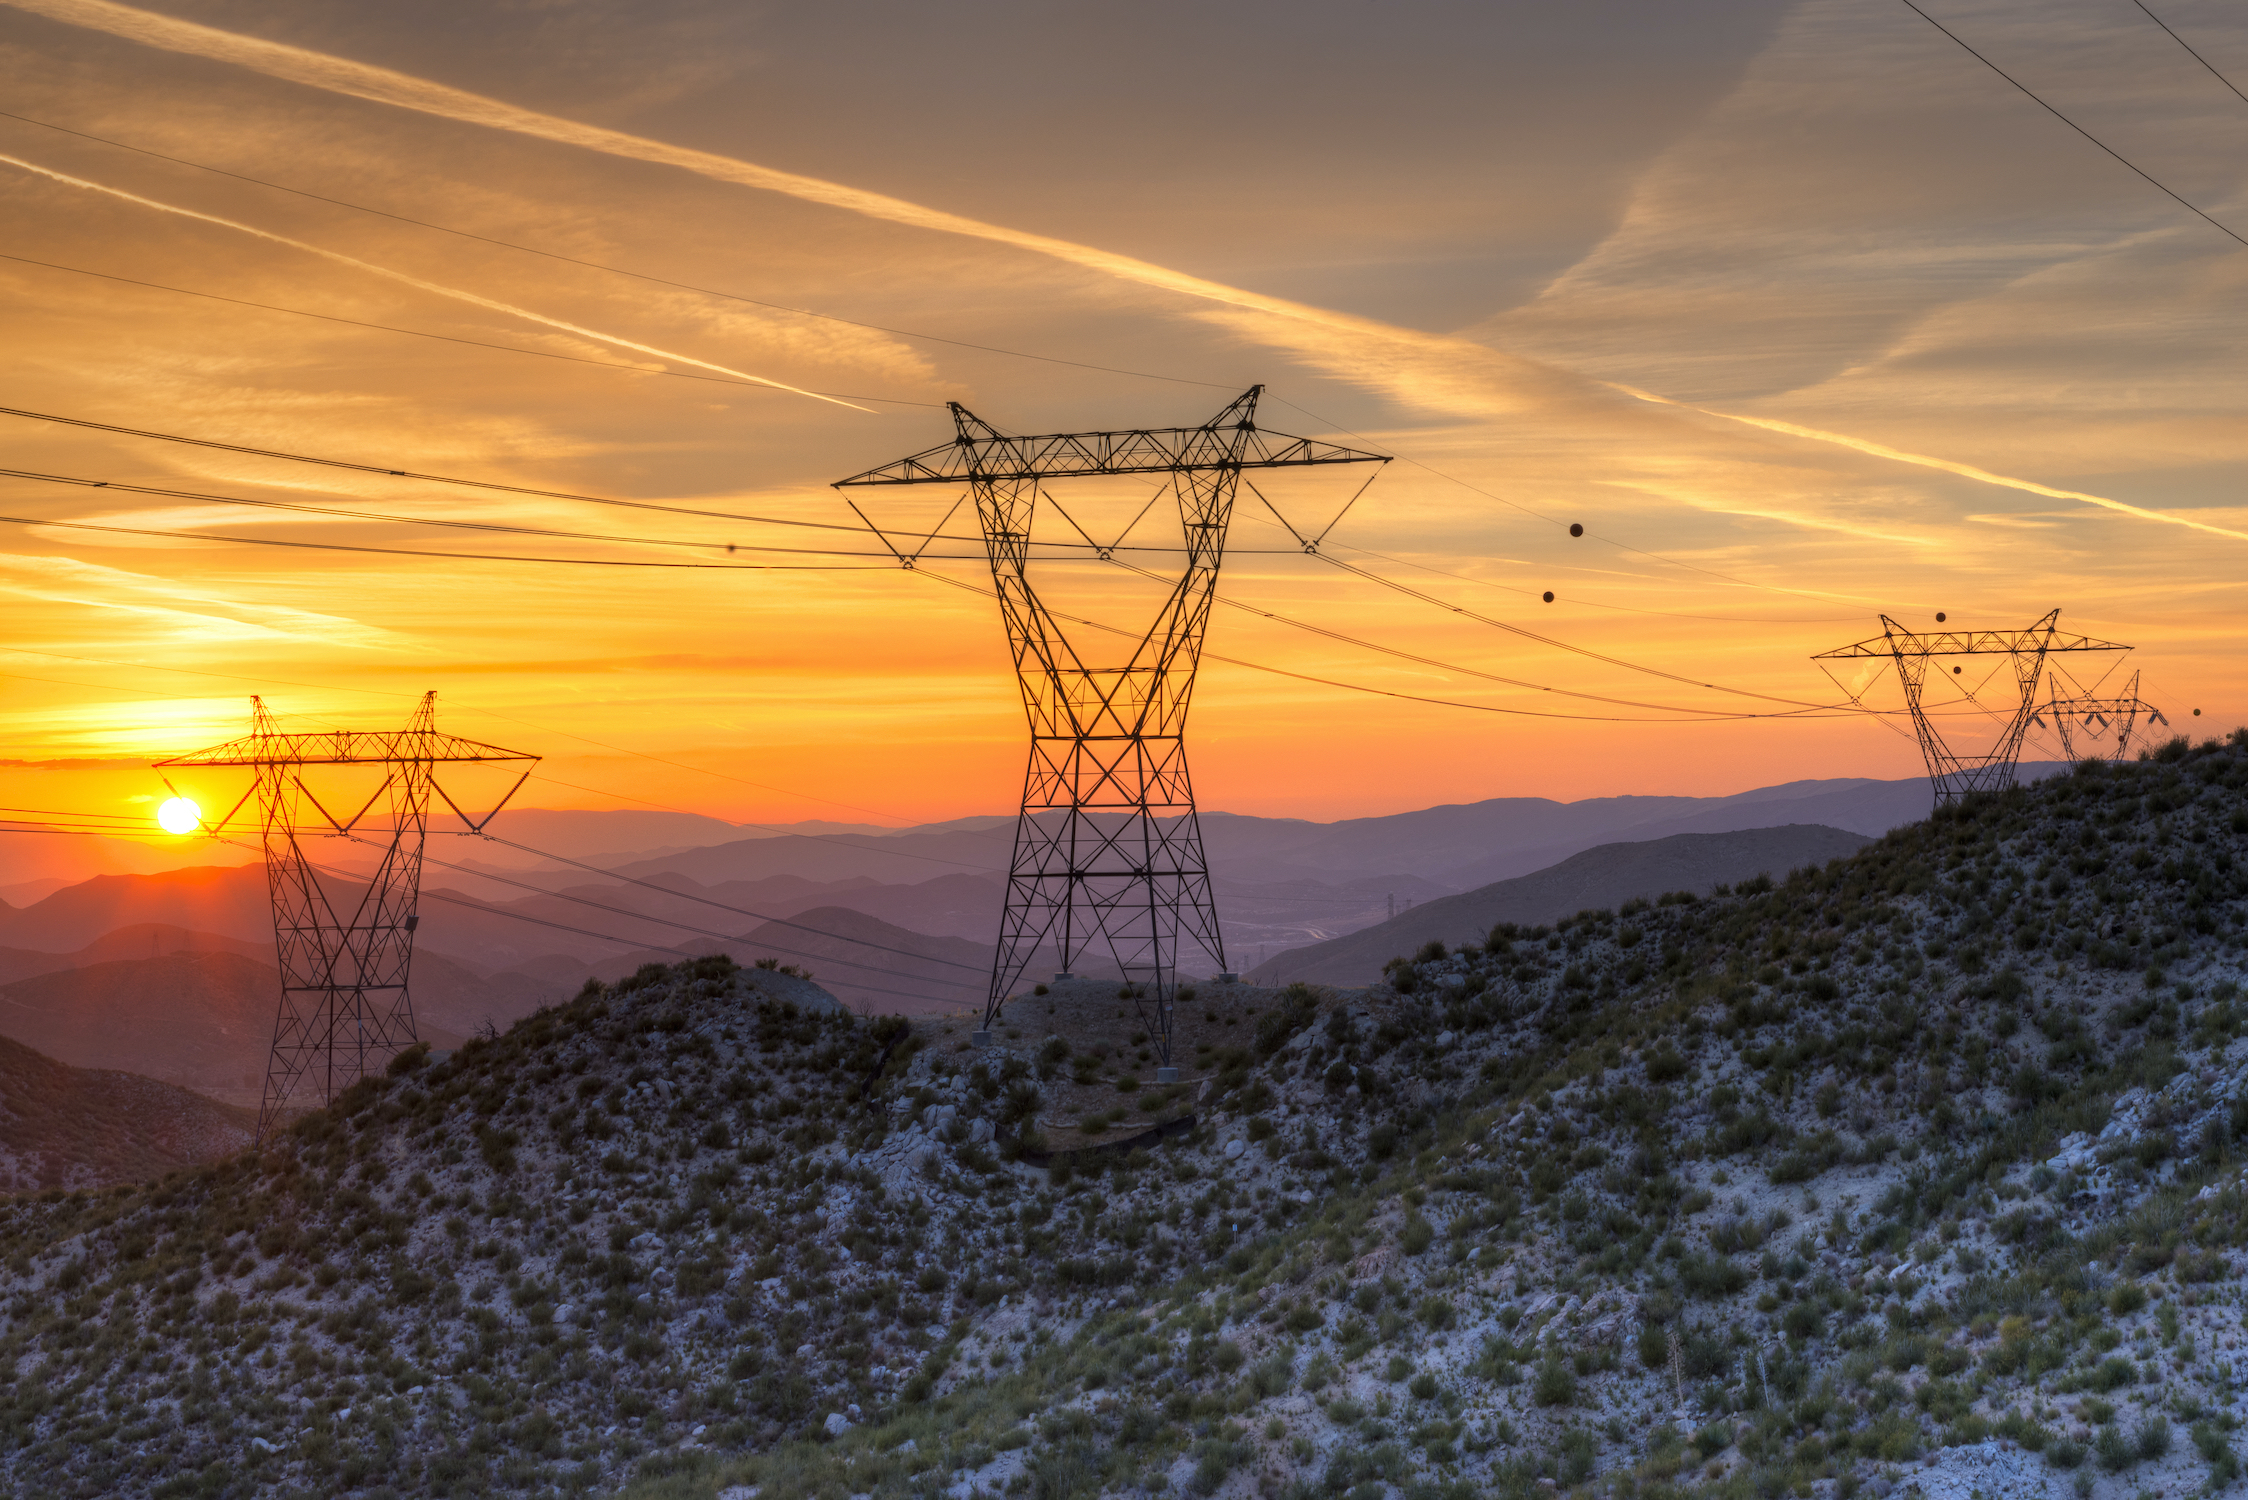 Electric power lines in a California landscape at sunset